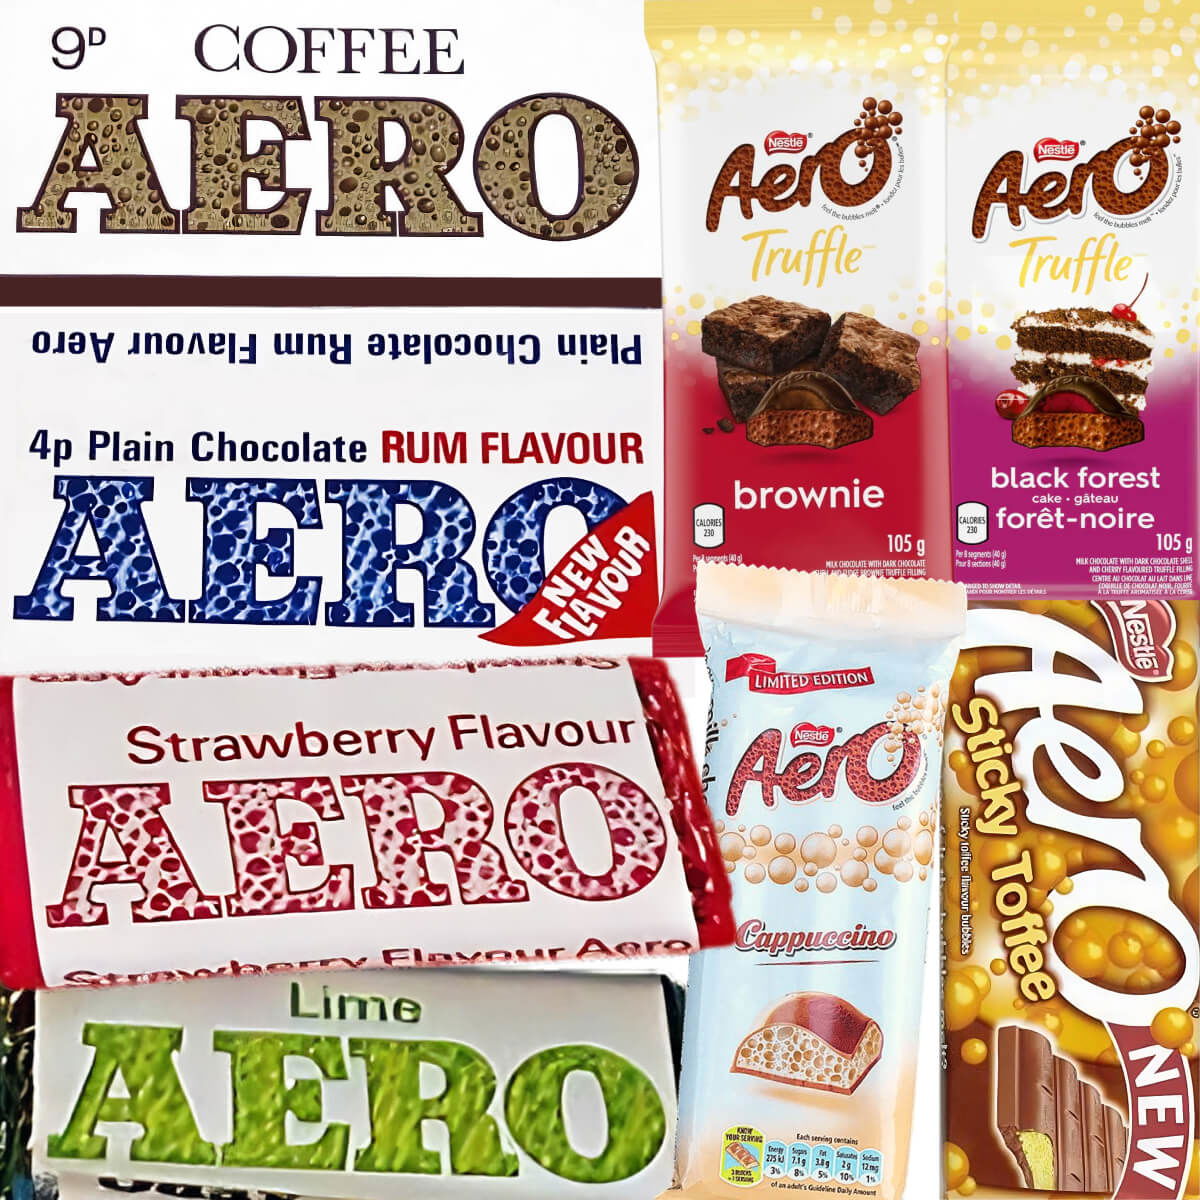 Selection of Aero chocolate bars with unusual flavours; Coffee, Rum, Strawberry, Lime, Brownie, Black Forest, Cappuccino and Sticky Toffee